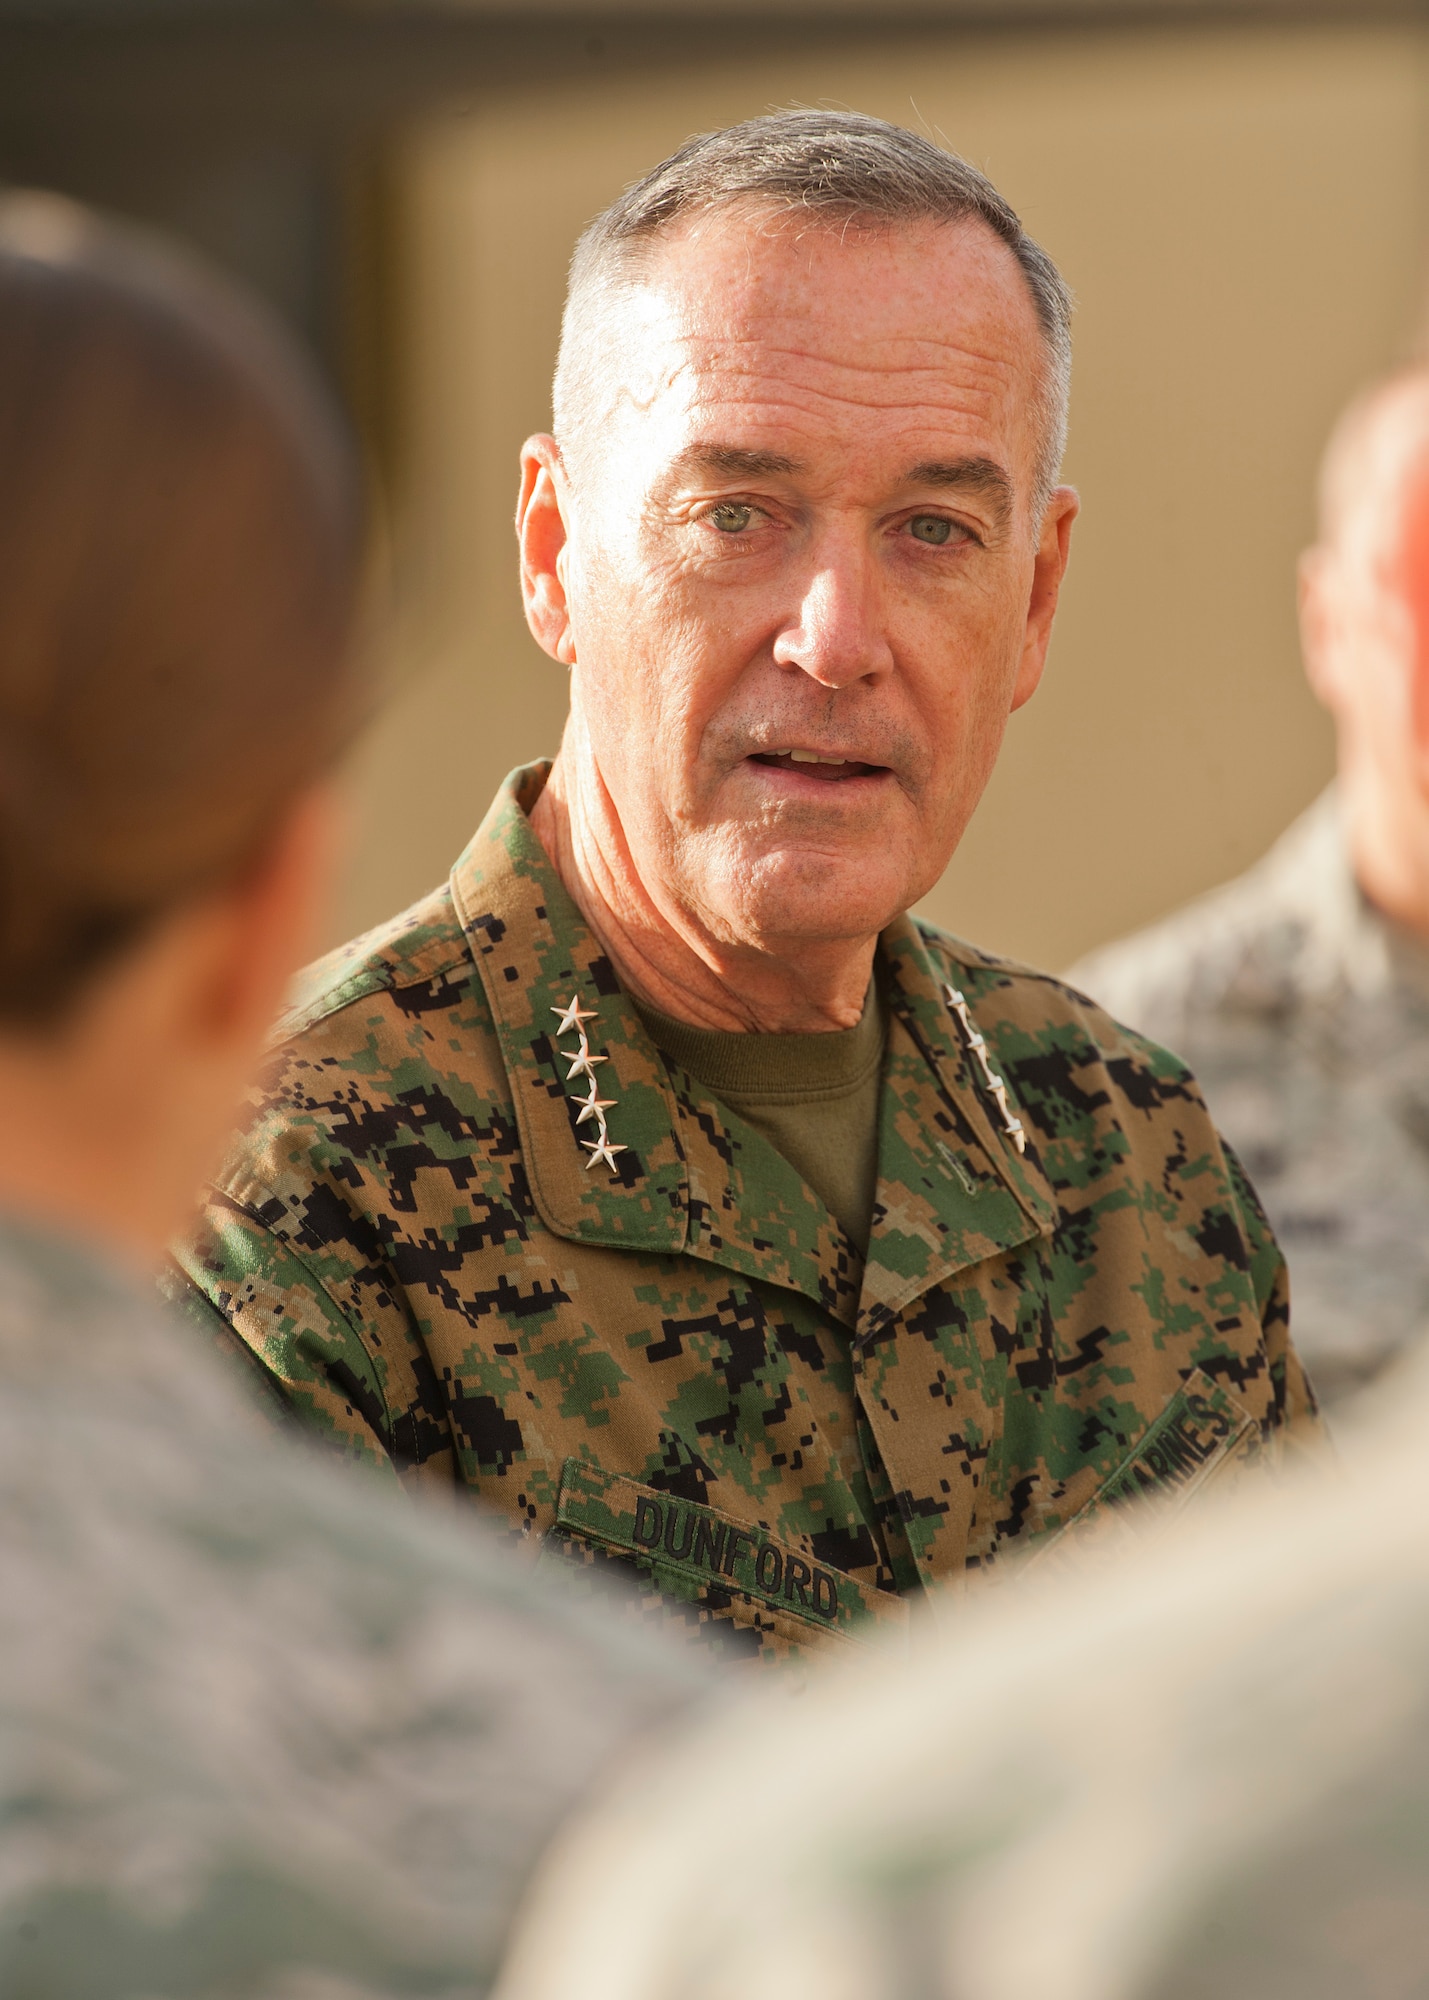 U.S. Marines Corps Gen. Joseph Dunford, chairman of the Joint Chiefs of Staff, speaks Team Minot members at Minot Air Force Base, N.D., Nov. 2, 2016. During his visit, Dunford spoke to Airmen about the future of the Air Force and the importance of Minot’s nuclear-capable readiness. (U.S. Air Force photo/Airman 1st Class J.T. Armstrong)